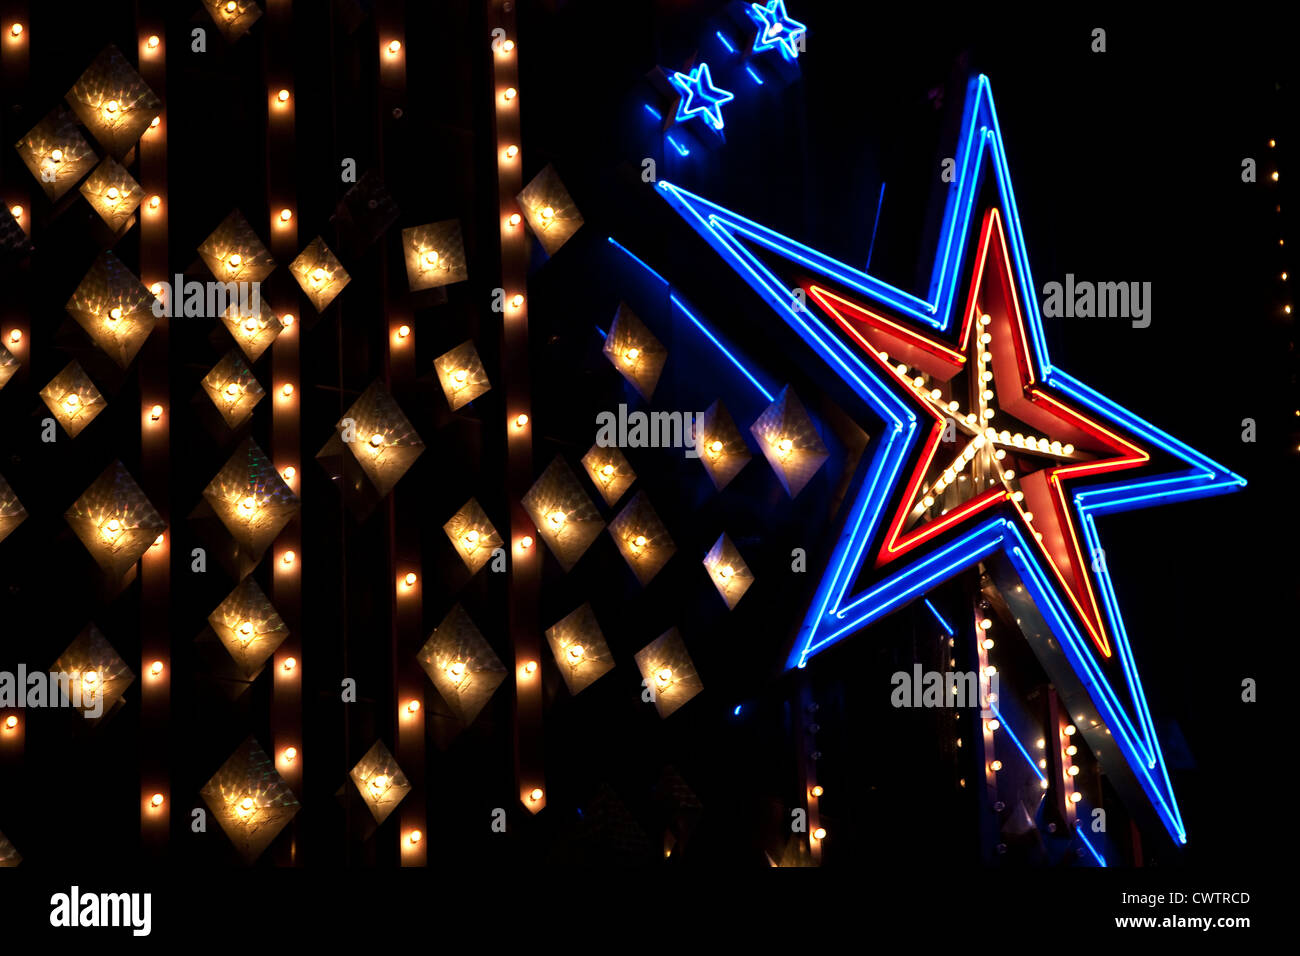 blue neon starlight and white lights on a black background abstract Stock Photo